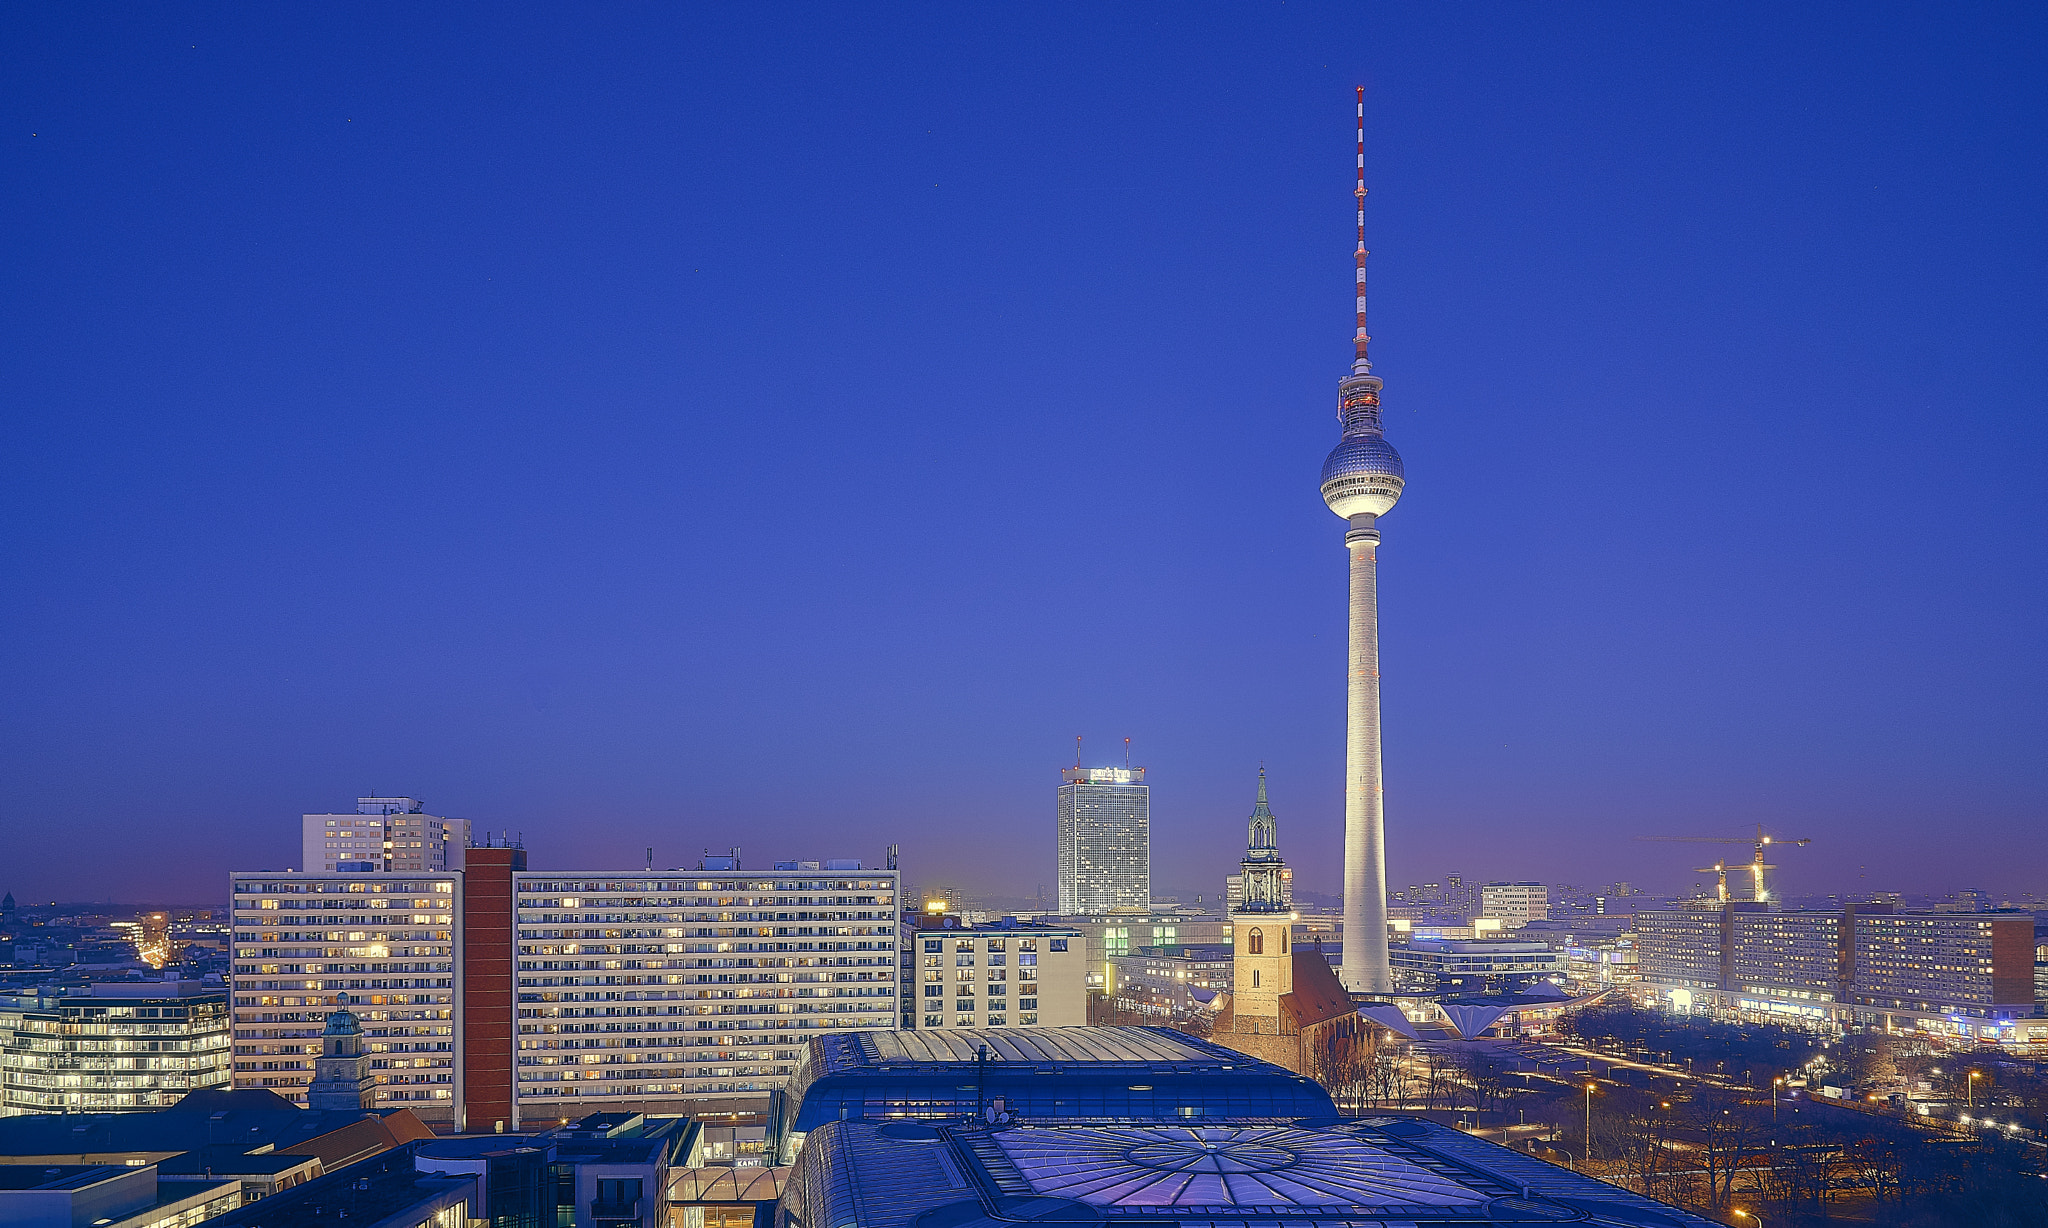 Sony a6300 sample photo. Berlin at blue hour photography